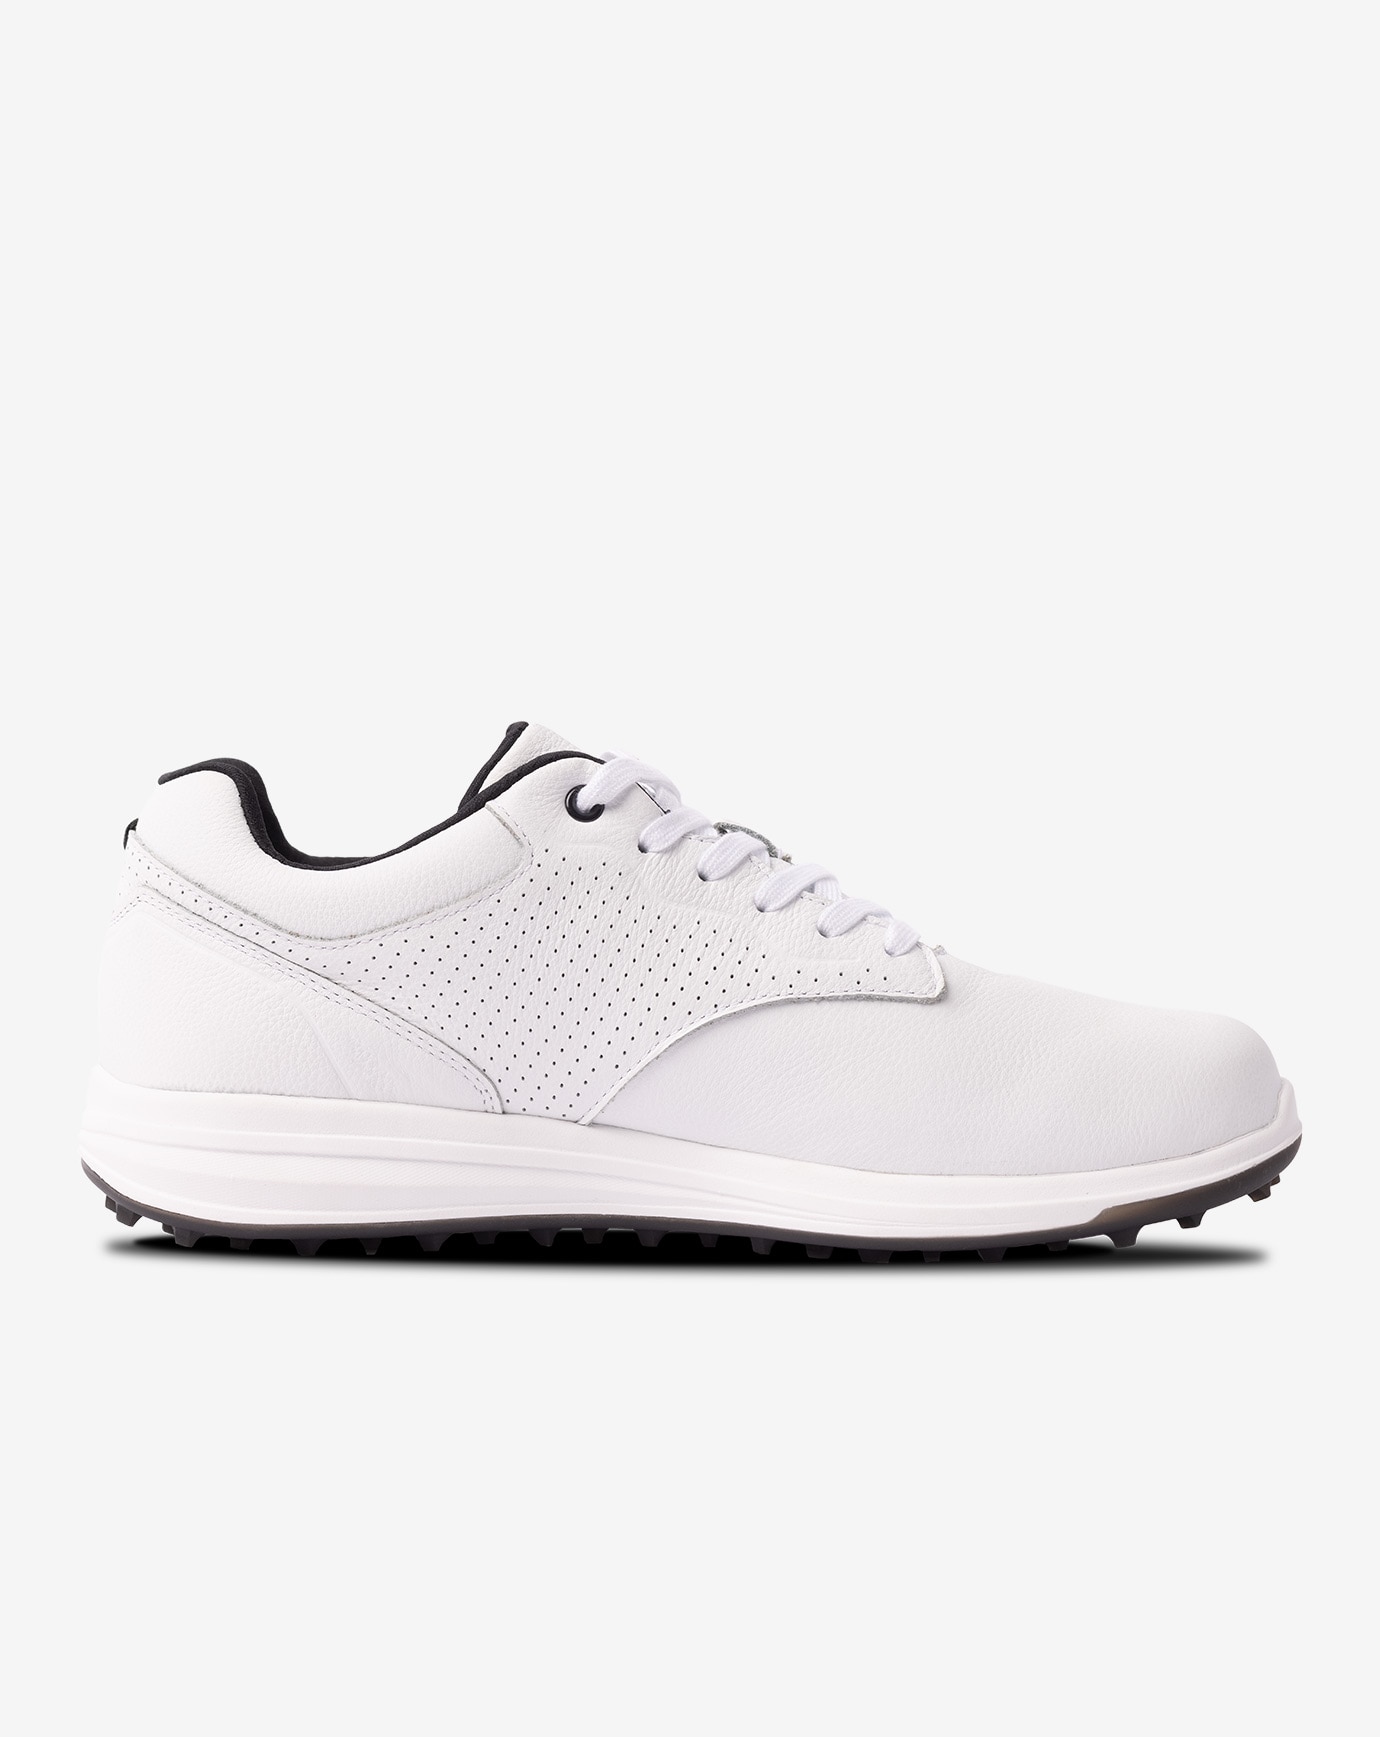 THE MONEYMAKER LUX SPIKELESS GOLF SHOE Image Thumbnail 3